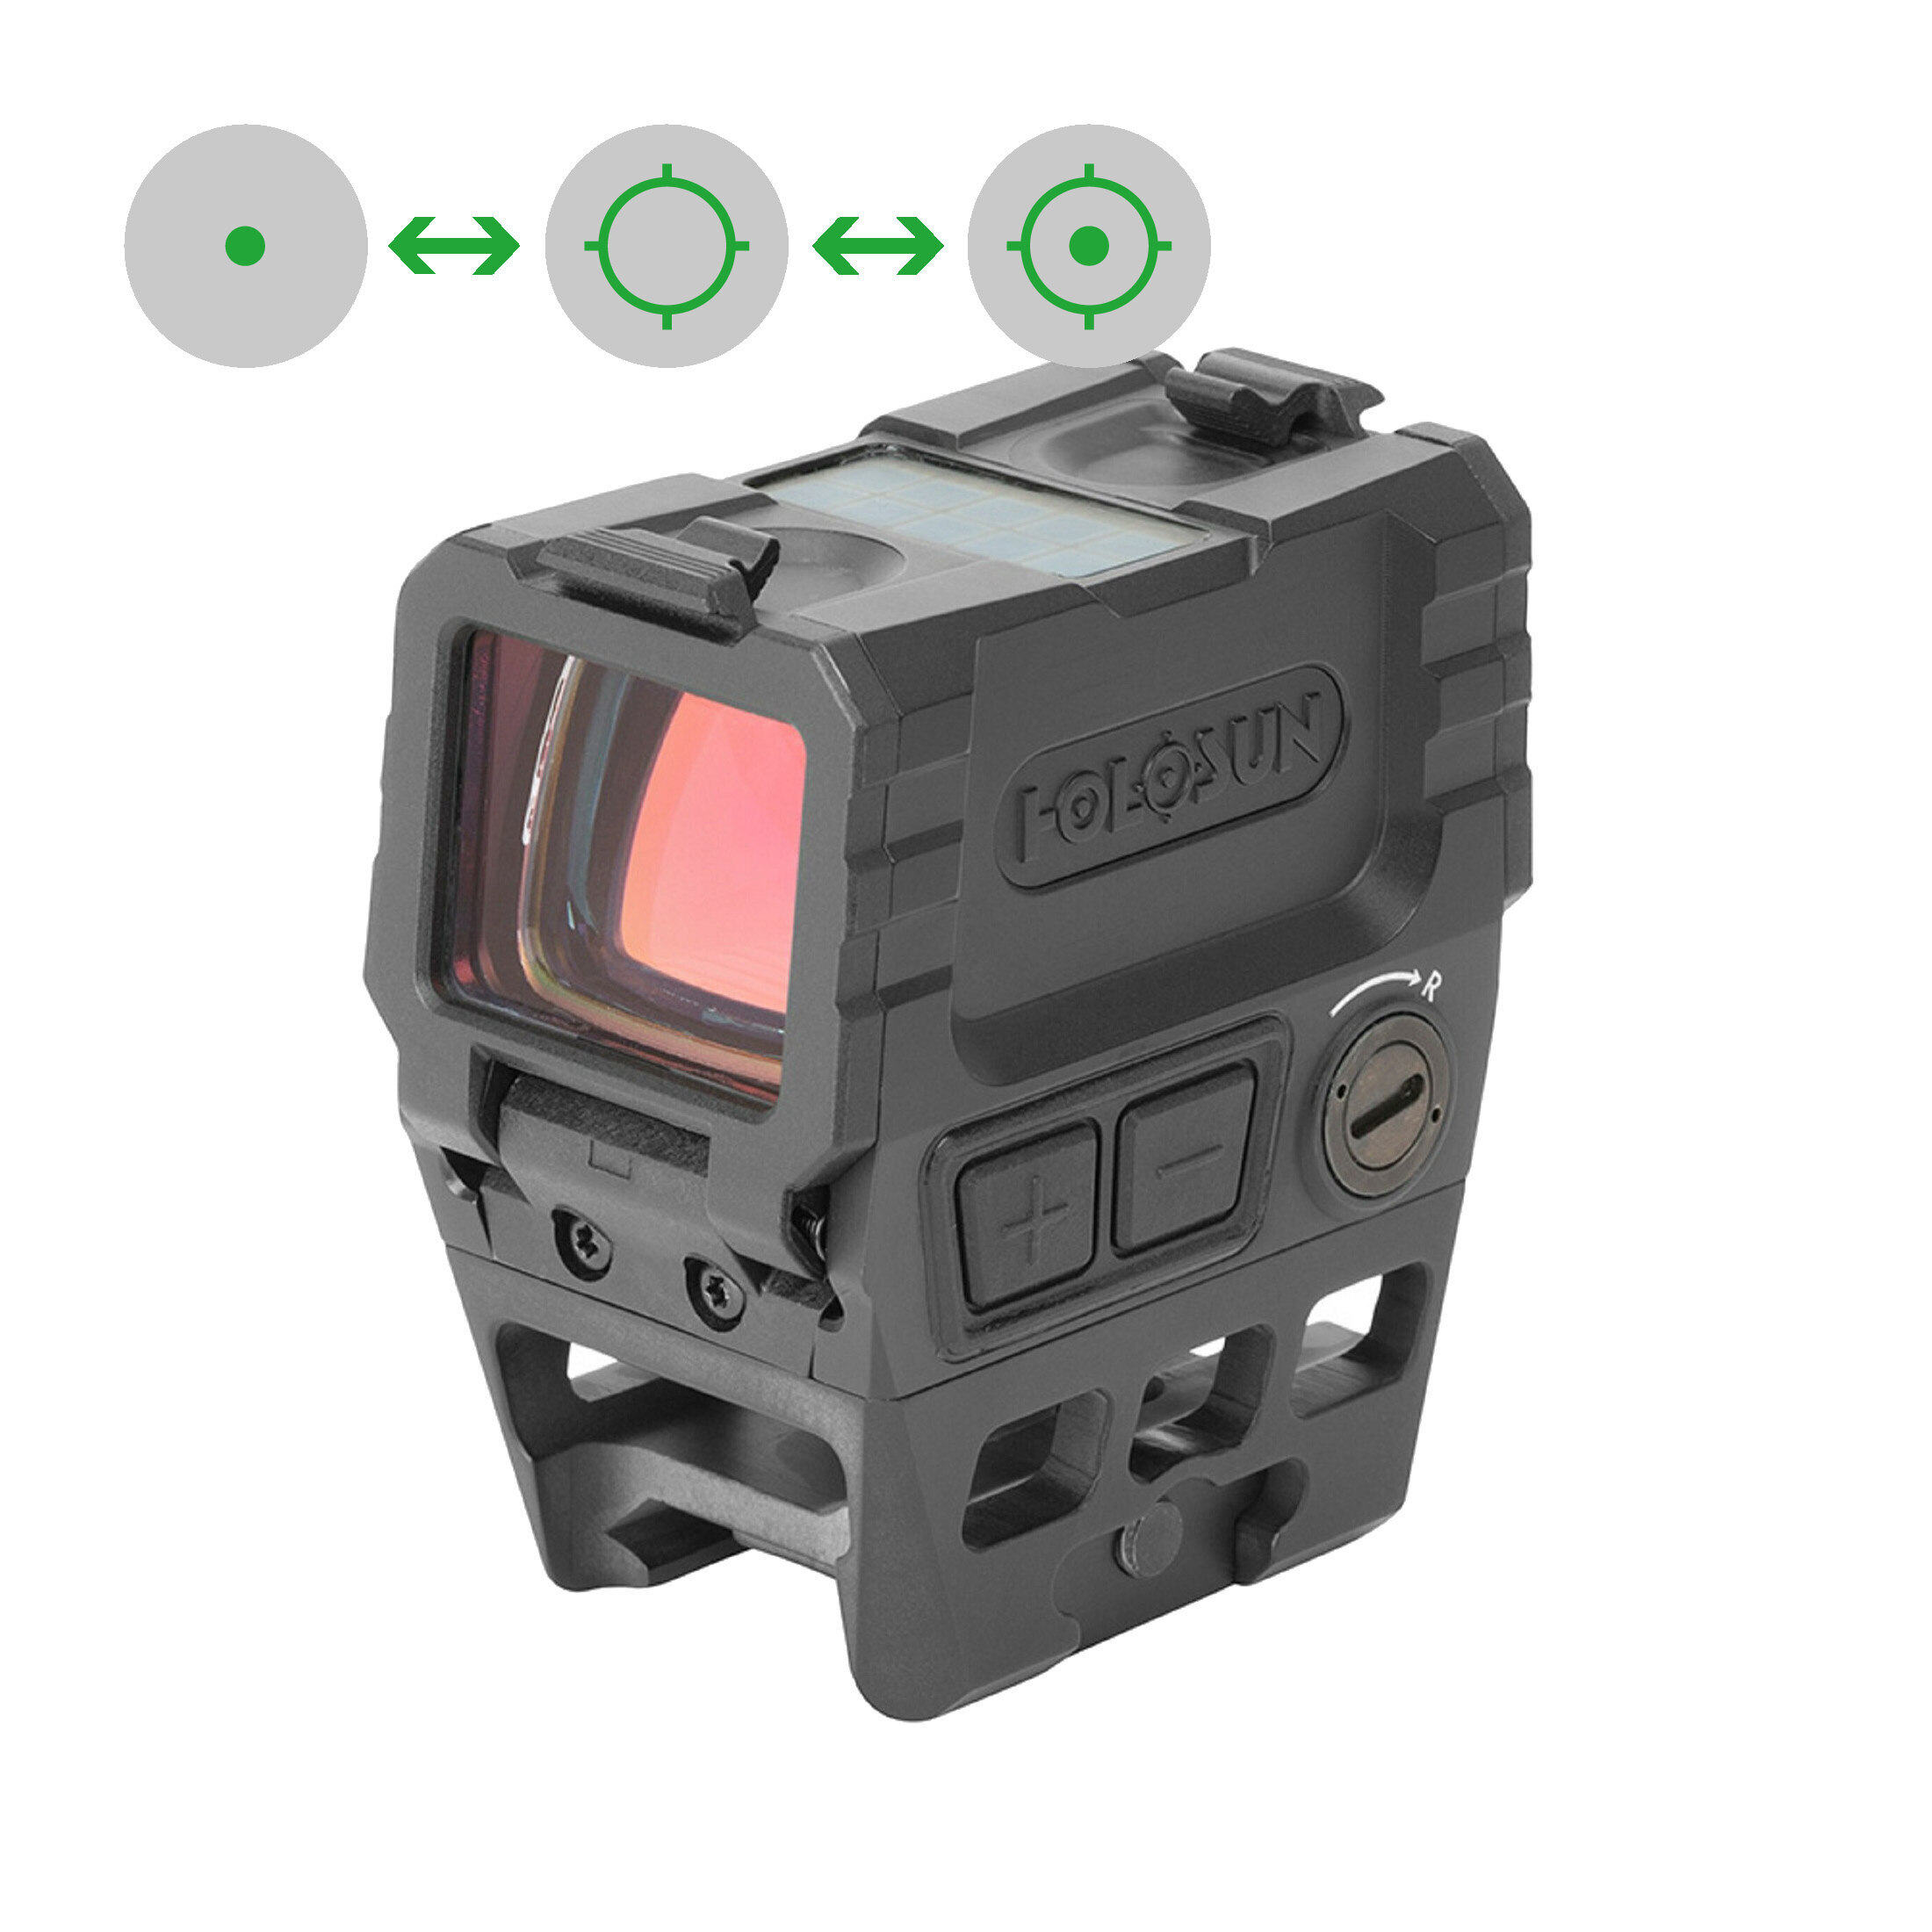 Holosun Classic Reflex Green Dot Sight AEMS-GR with switchable reticle and aluminium housing, glass…